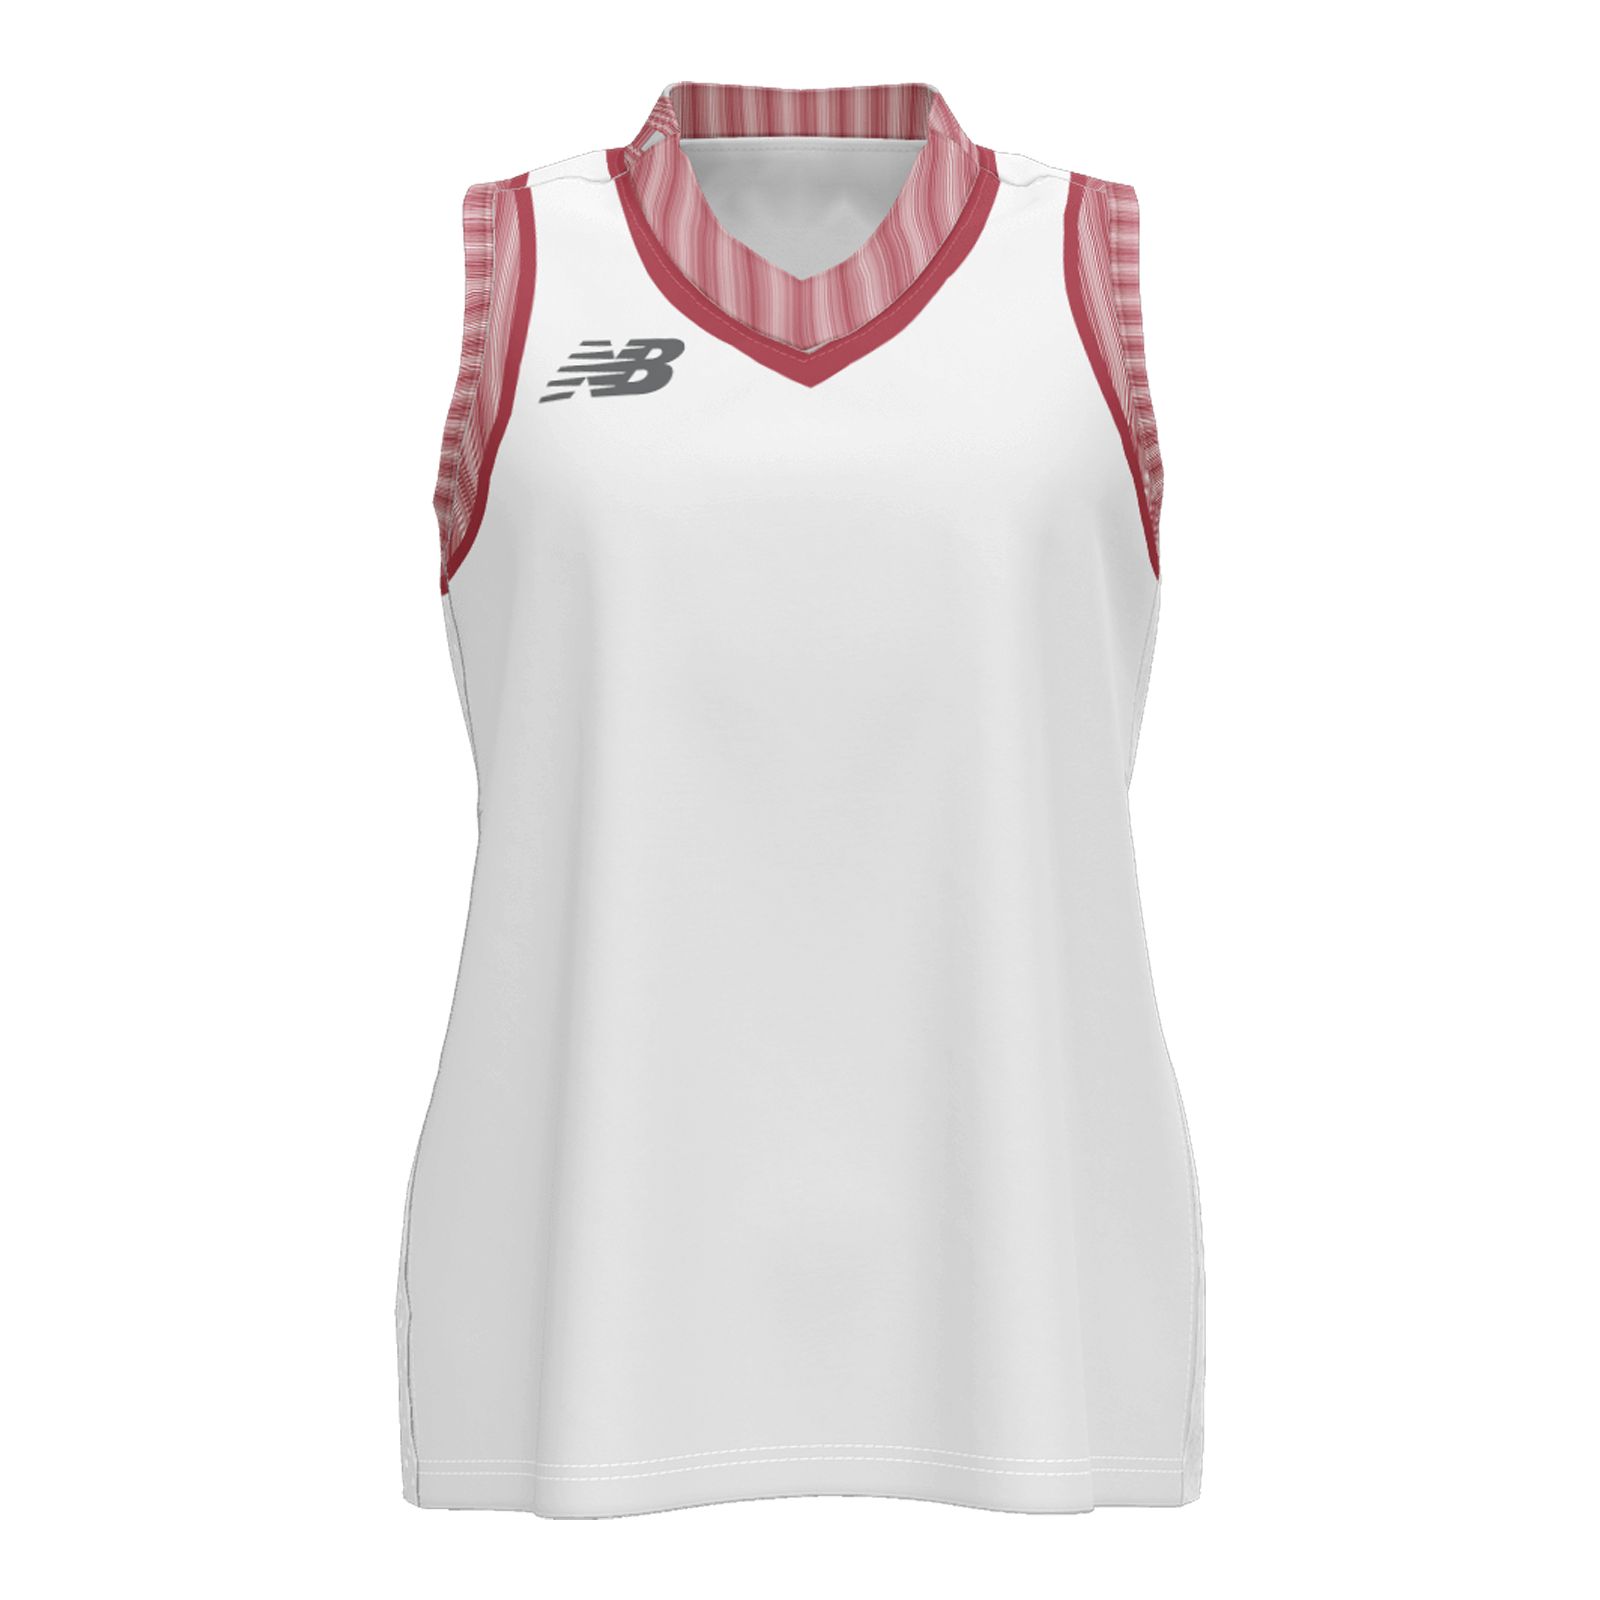 Girls Club Reversible Jersey - Youth - Lacrosse, - NB Team Sports - US